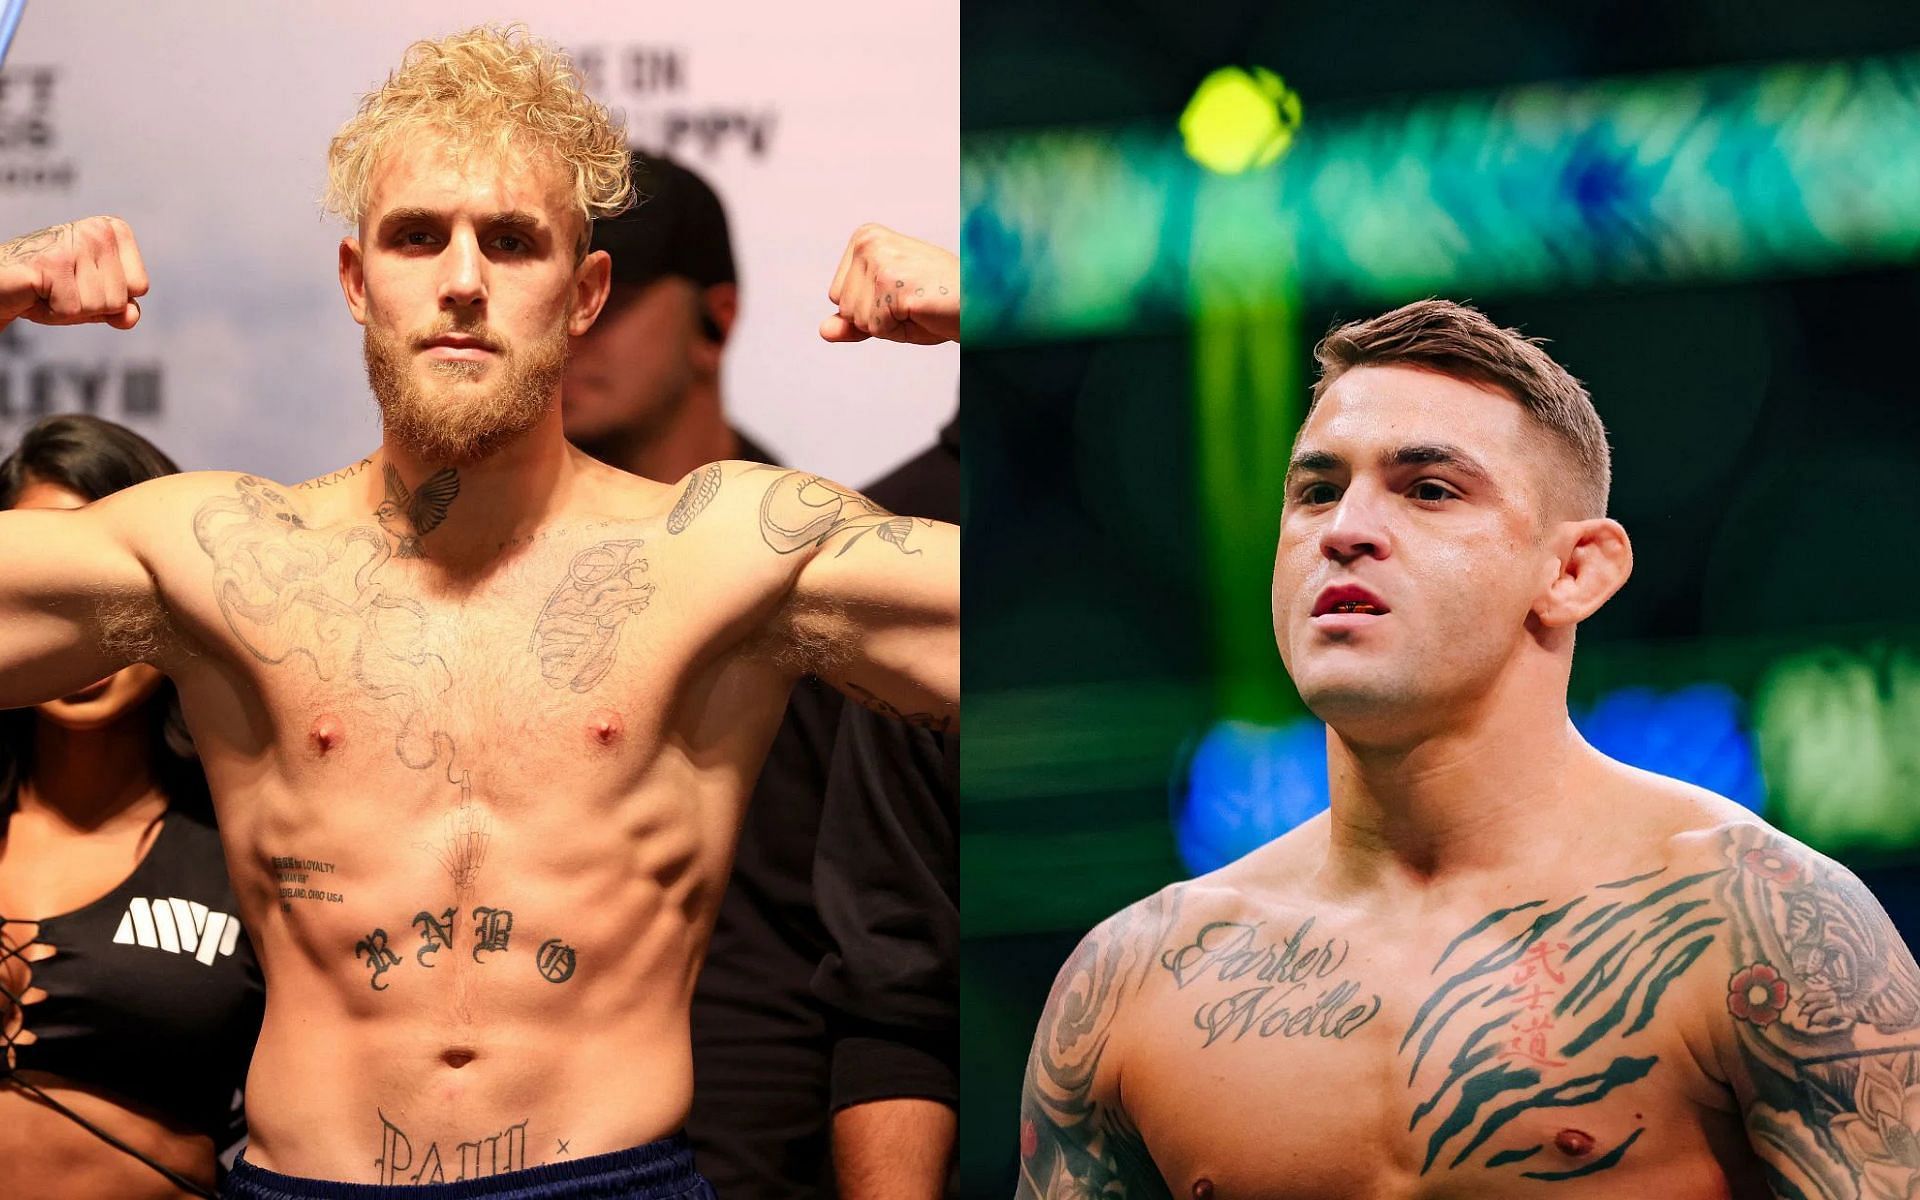 Jake Paul (left) and Dustin Poirier (right) [Images courtesy of Getty]